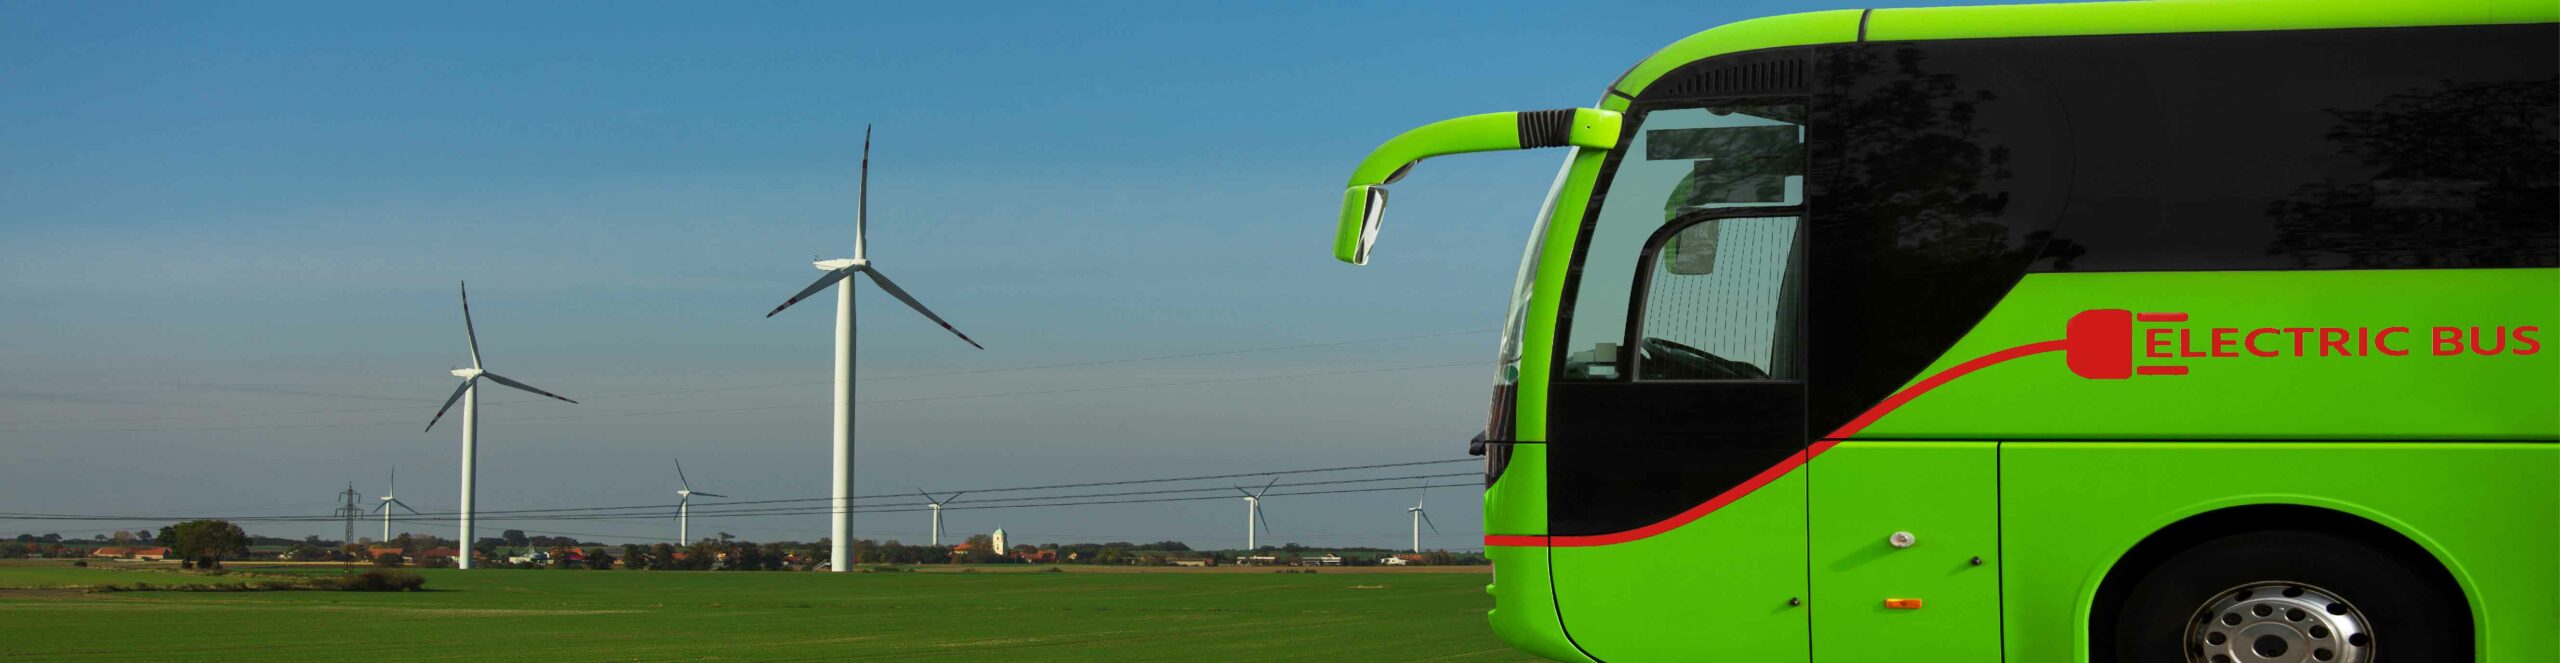 Electric bus charging in a field of wind turbines